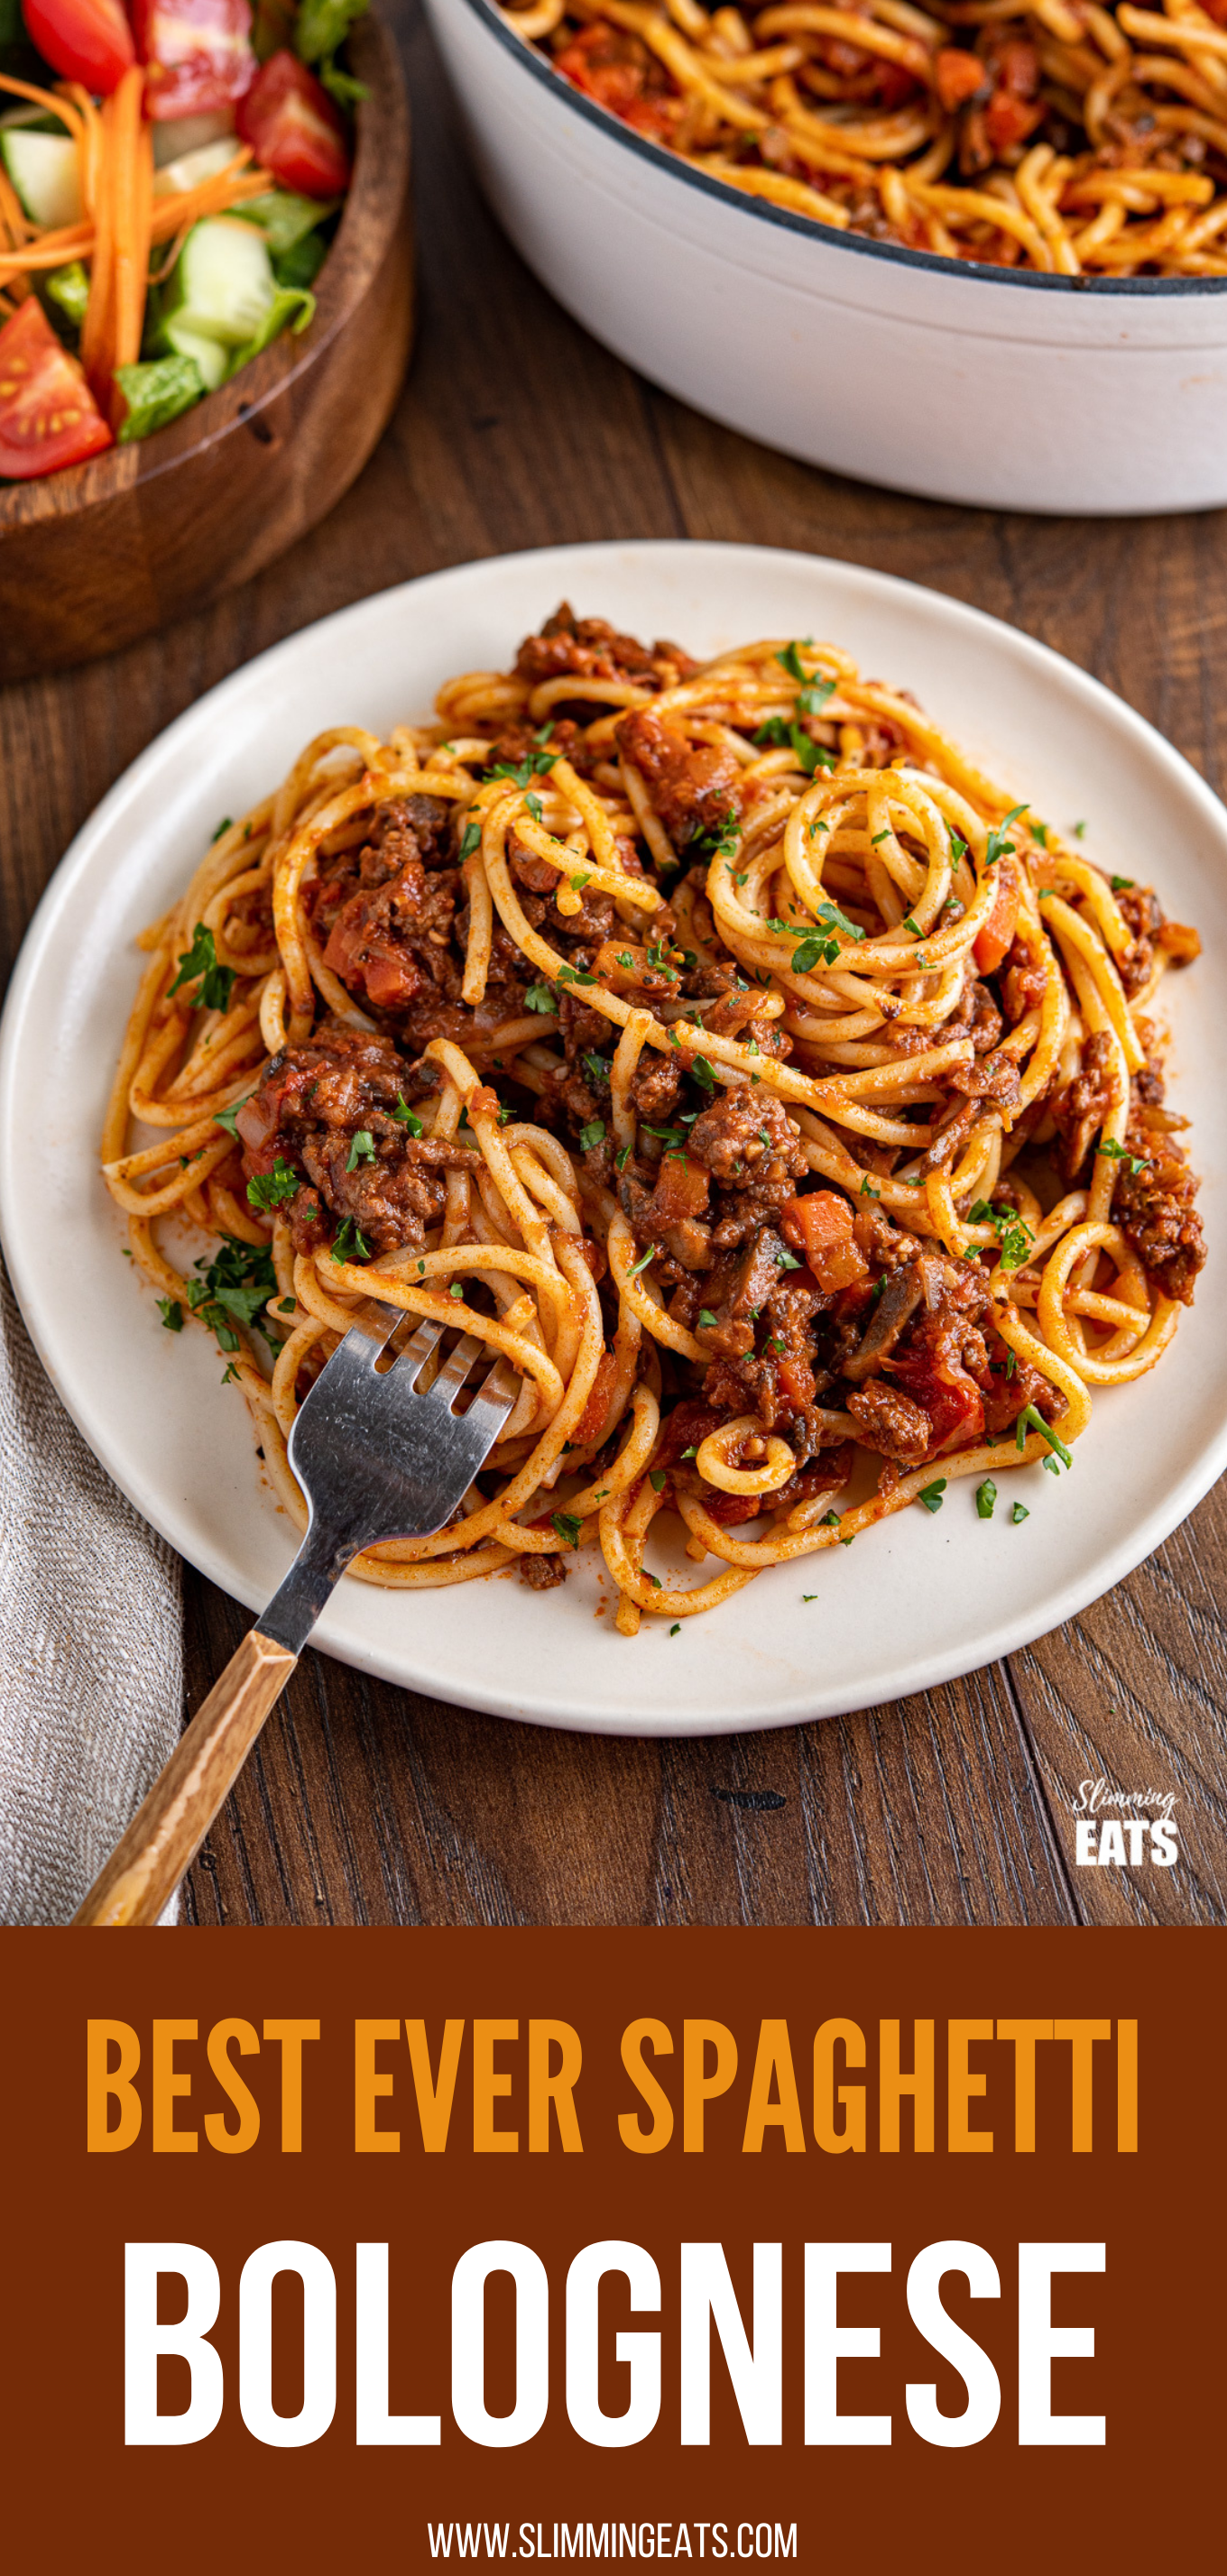 spaghetti bolognese on plate with fork, bowl of salad and pan of bolognese in background pin image.